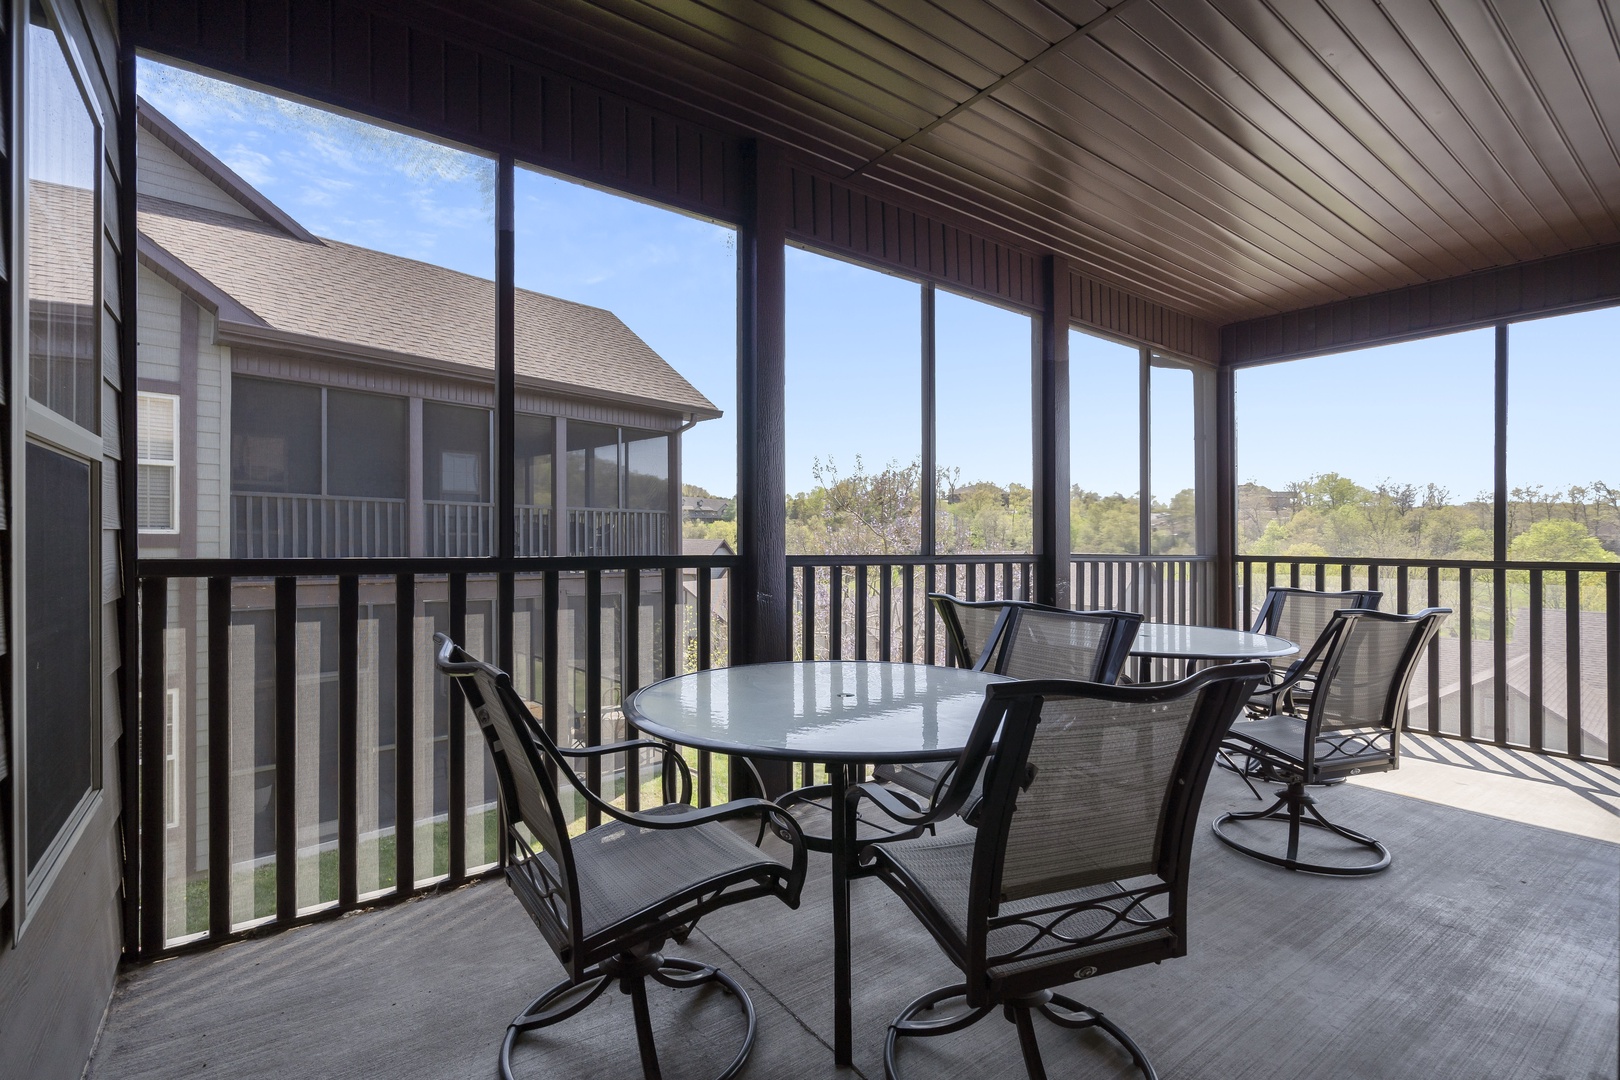 Screened deck with outdoor furniture